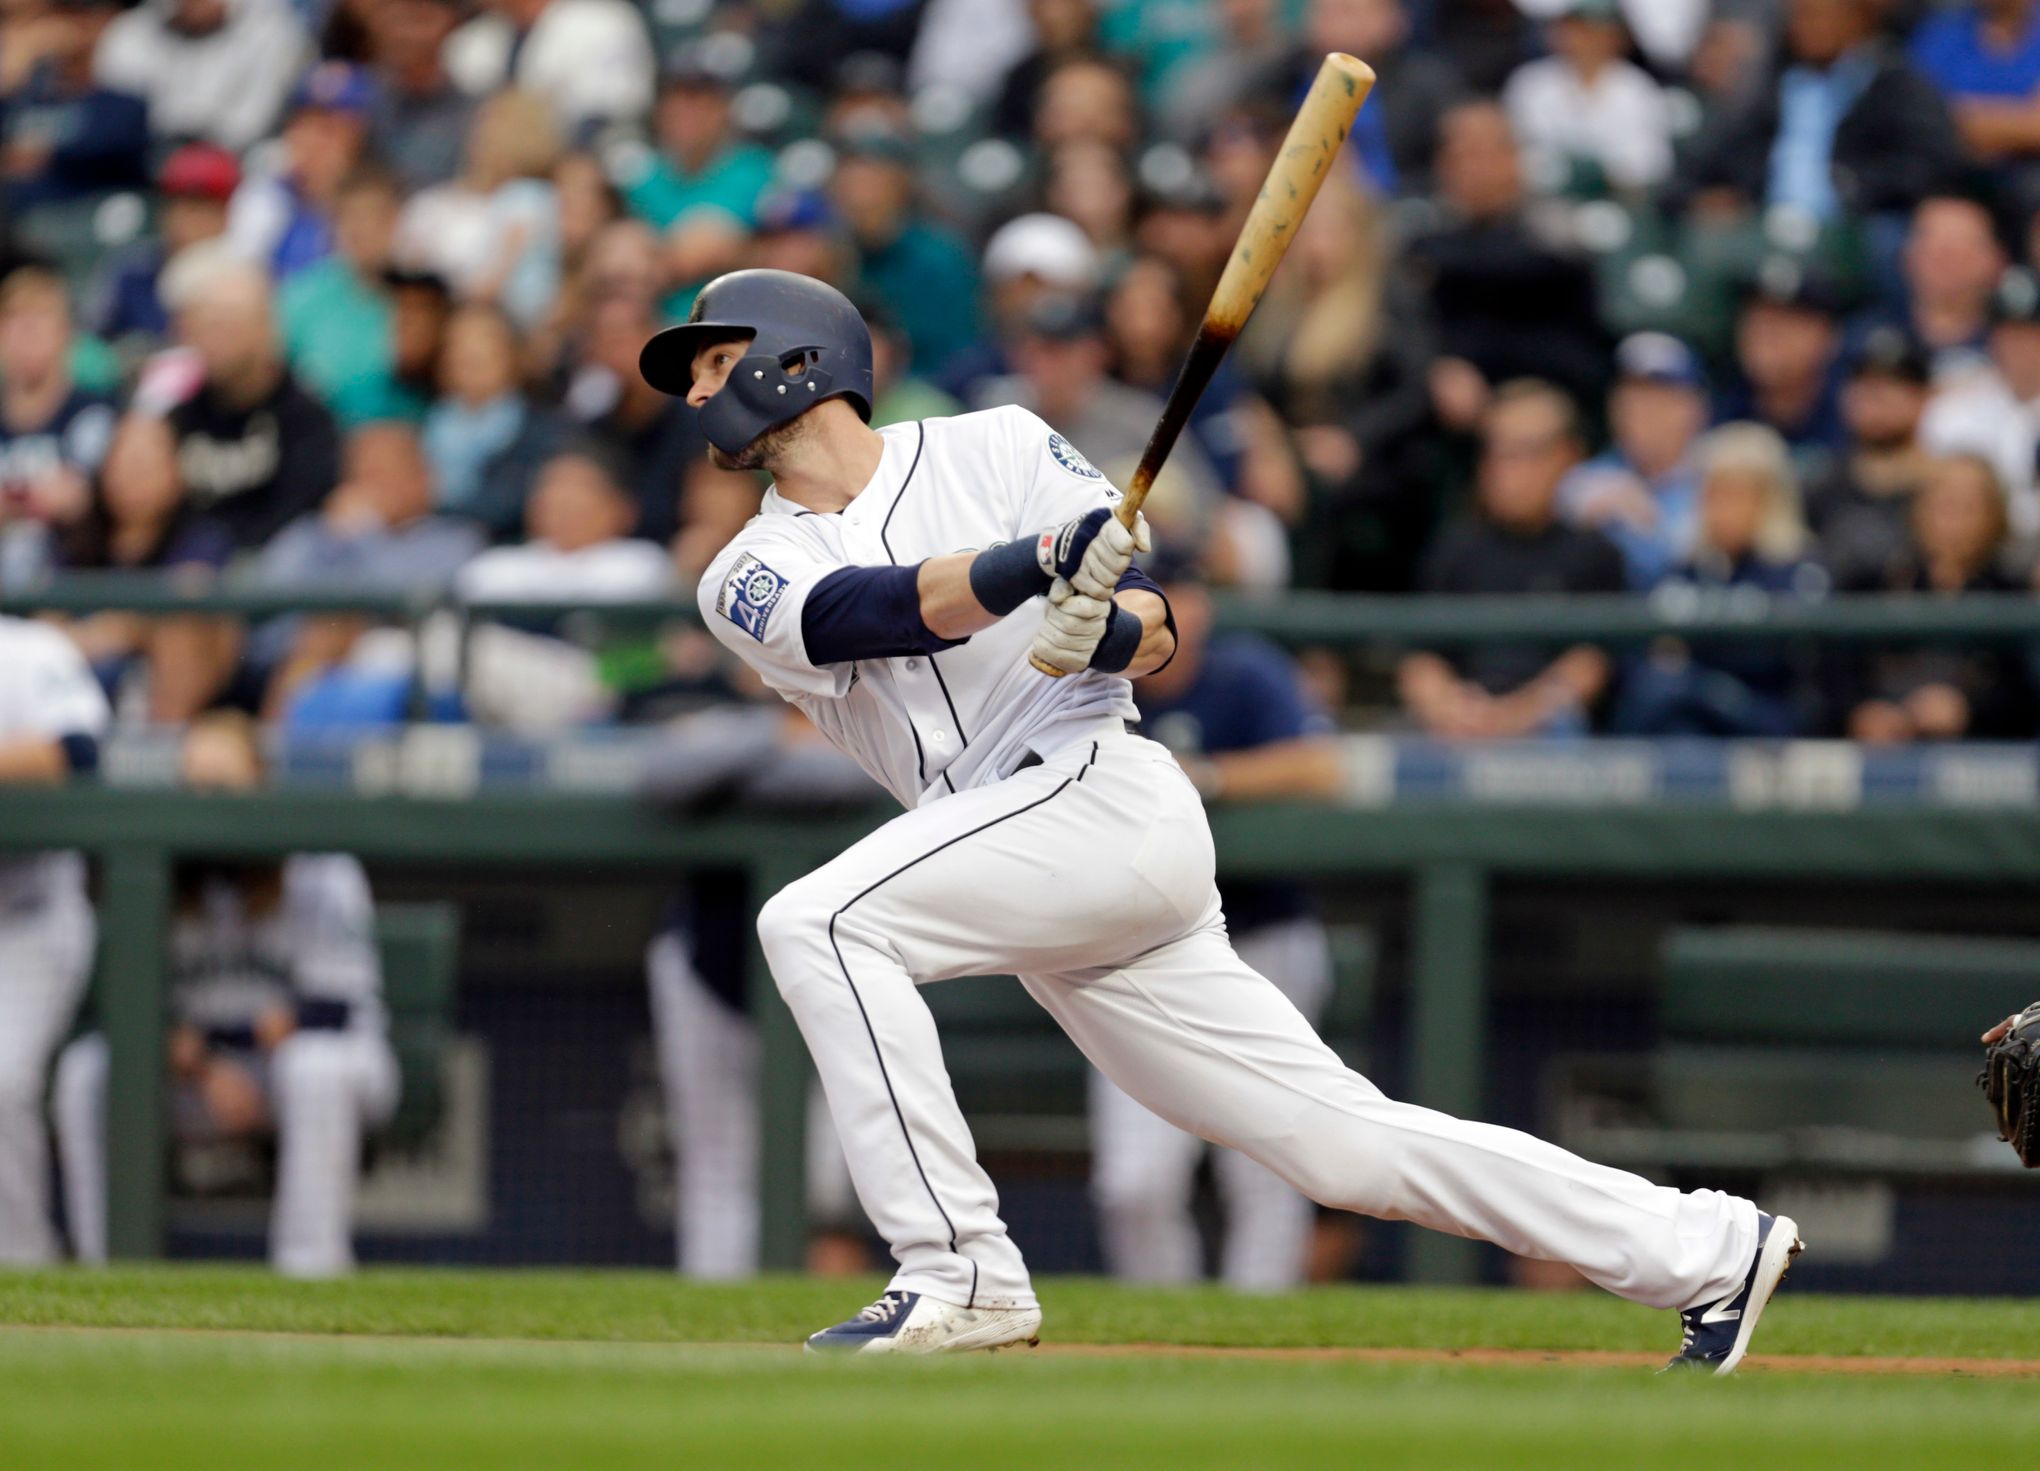 Mitch Haniger finishing strong in his rookie season with the